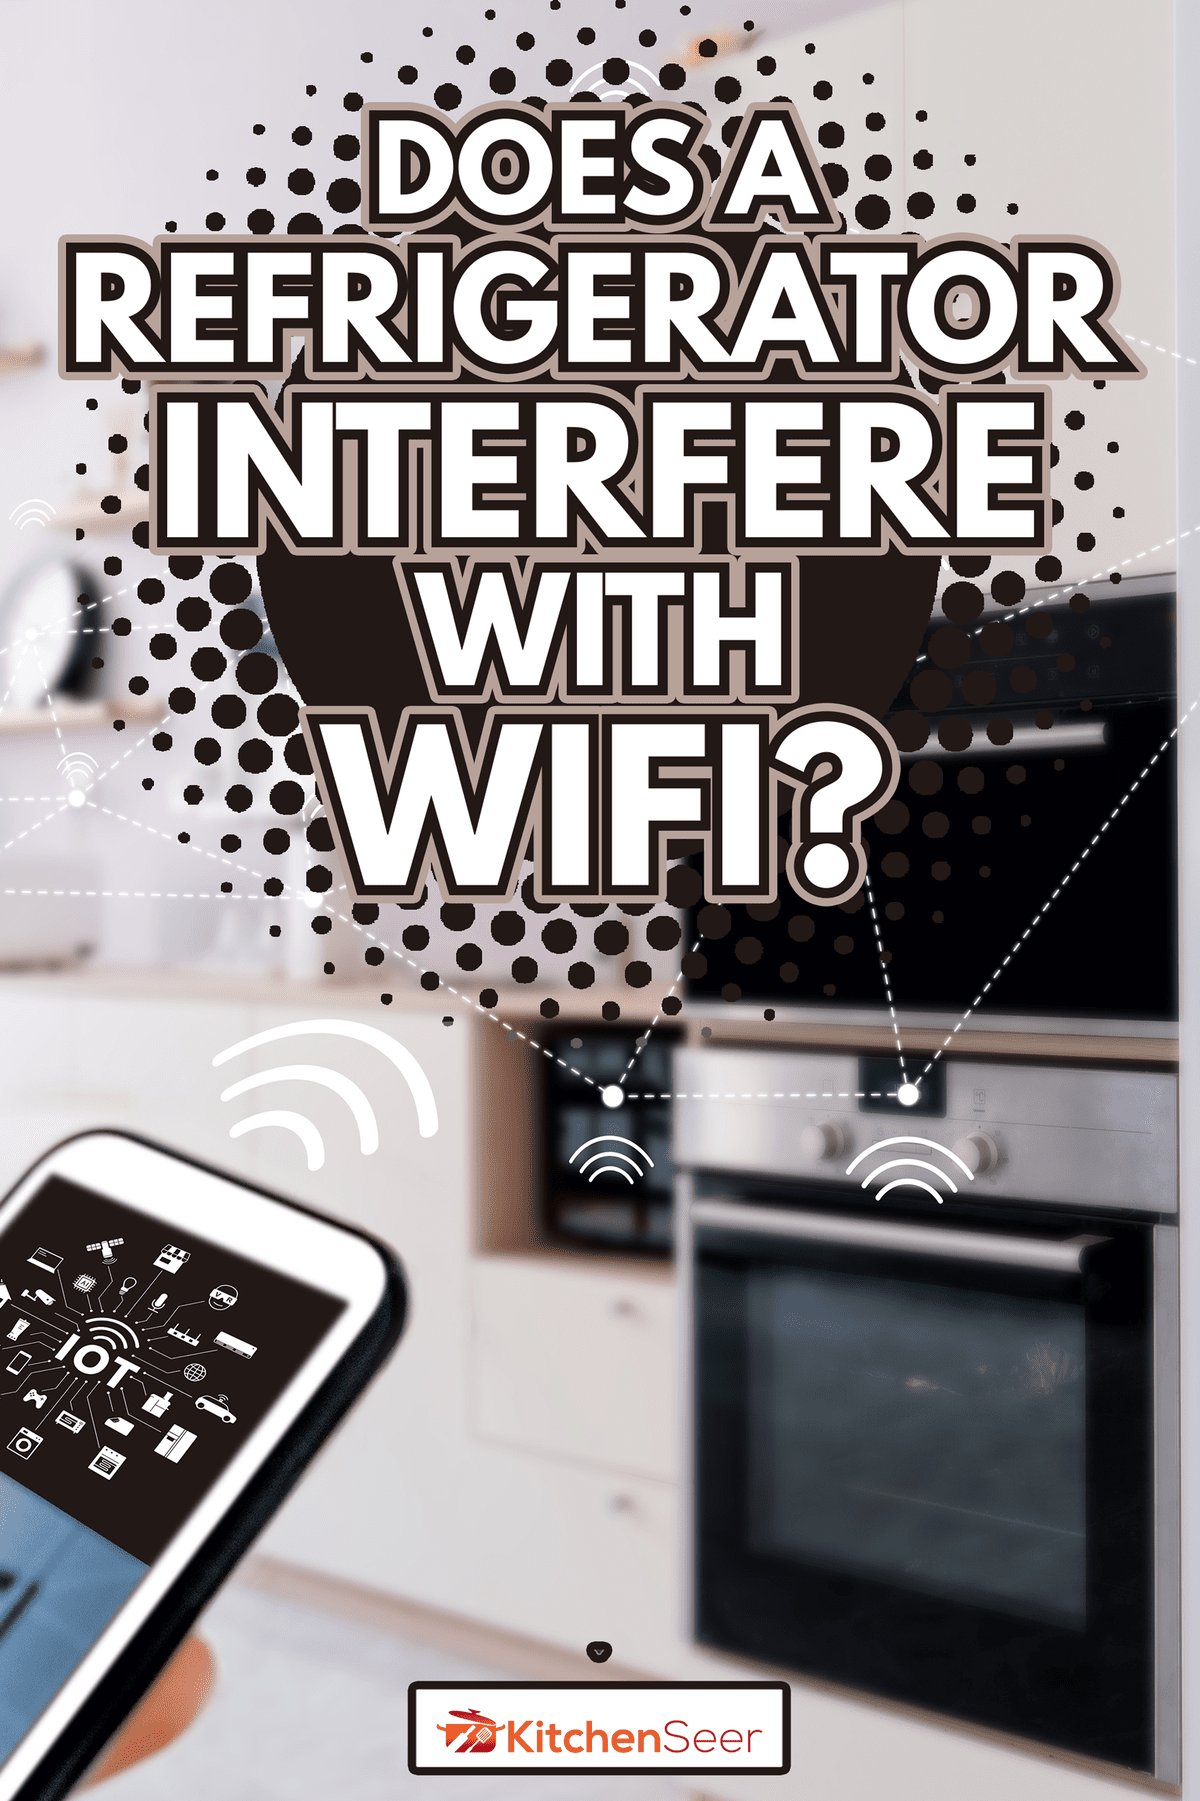 smart home, operating system concept of future - Does A Refrigerator Interfere With Wi-Fi